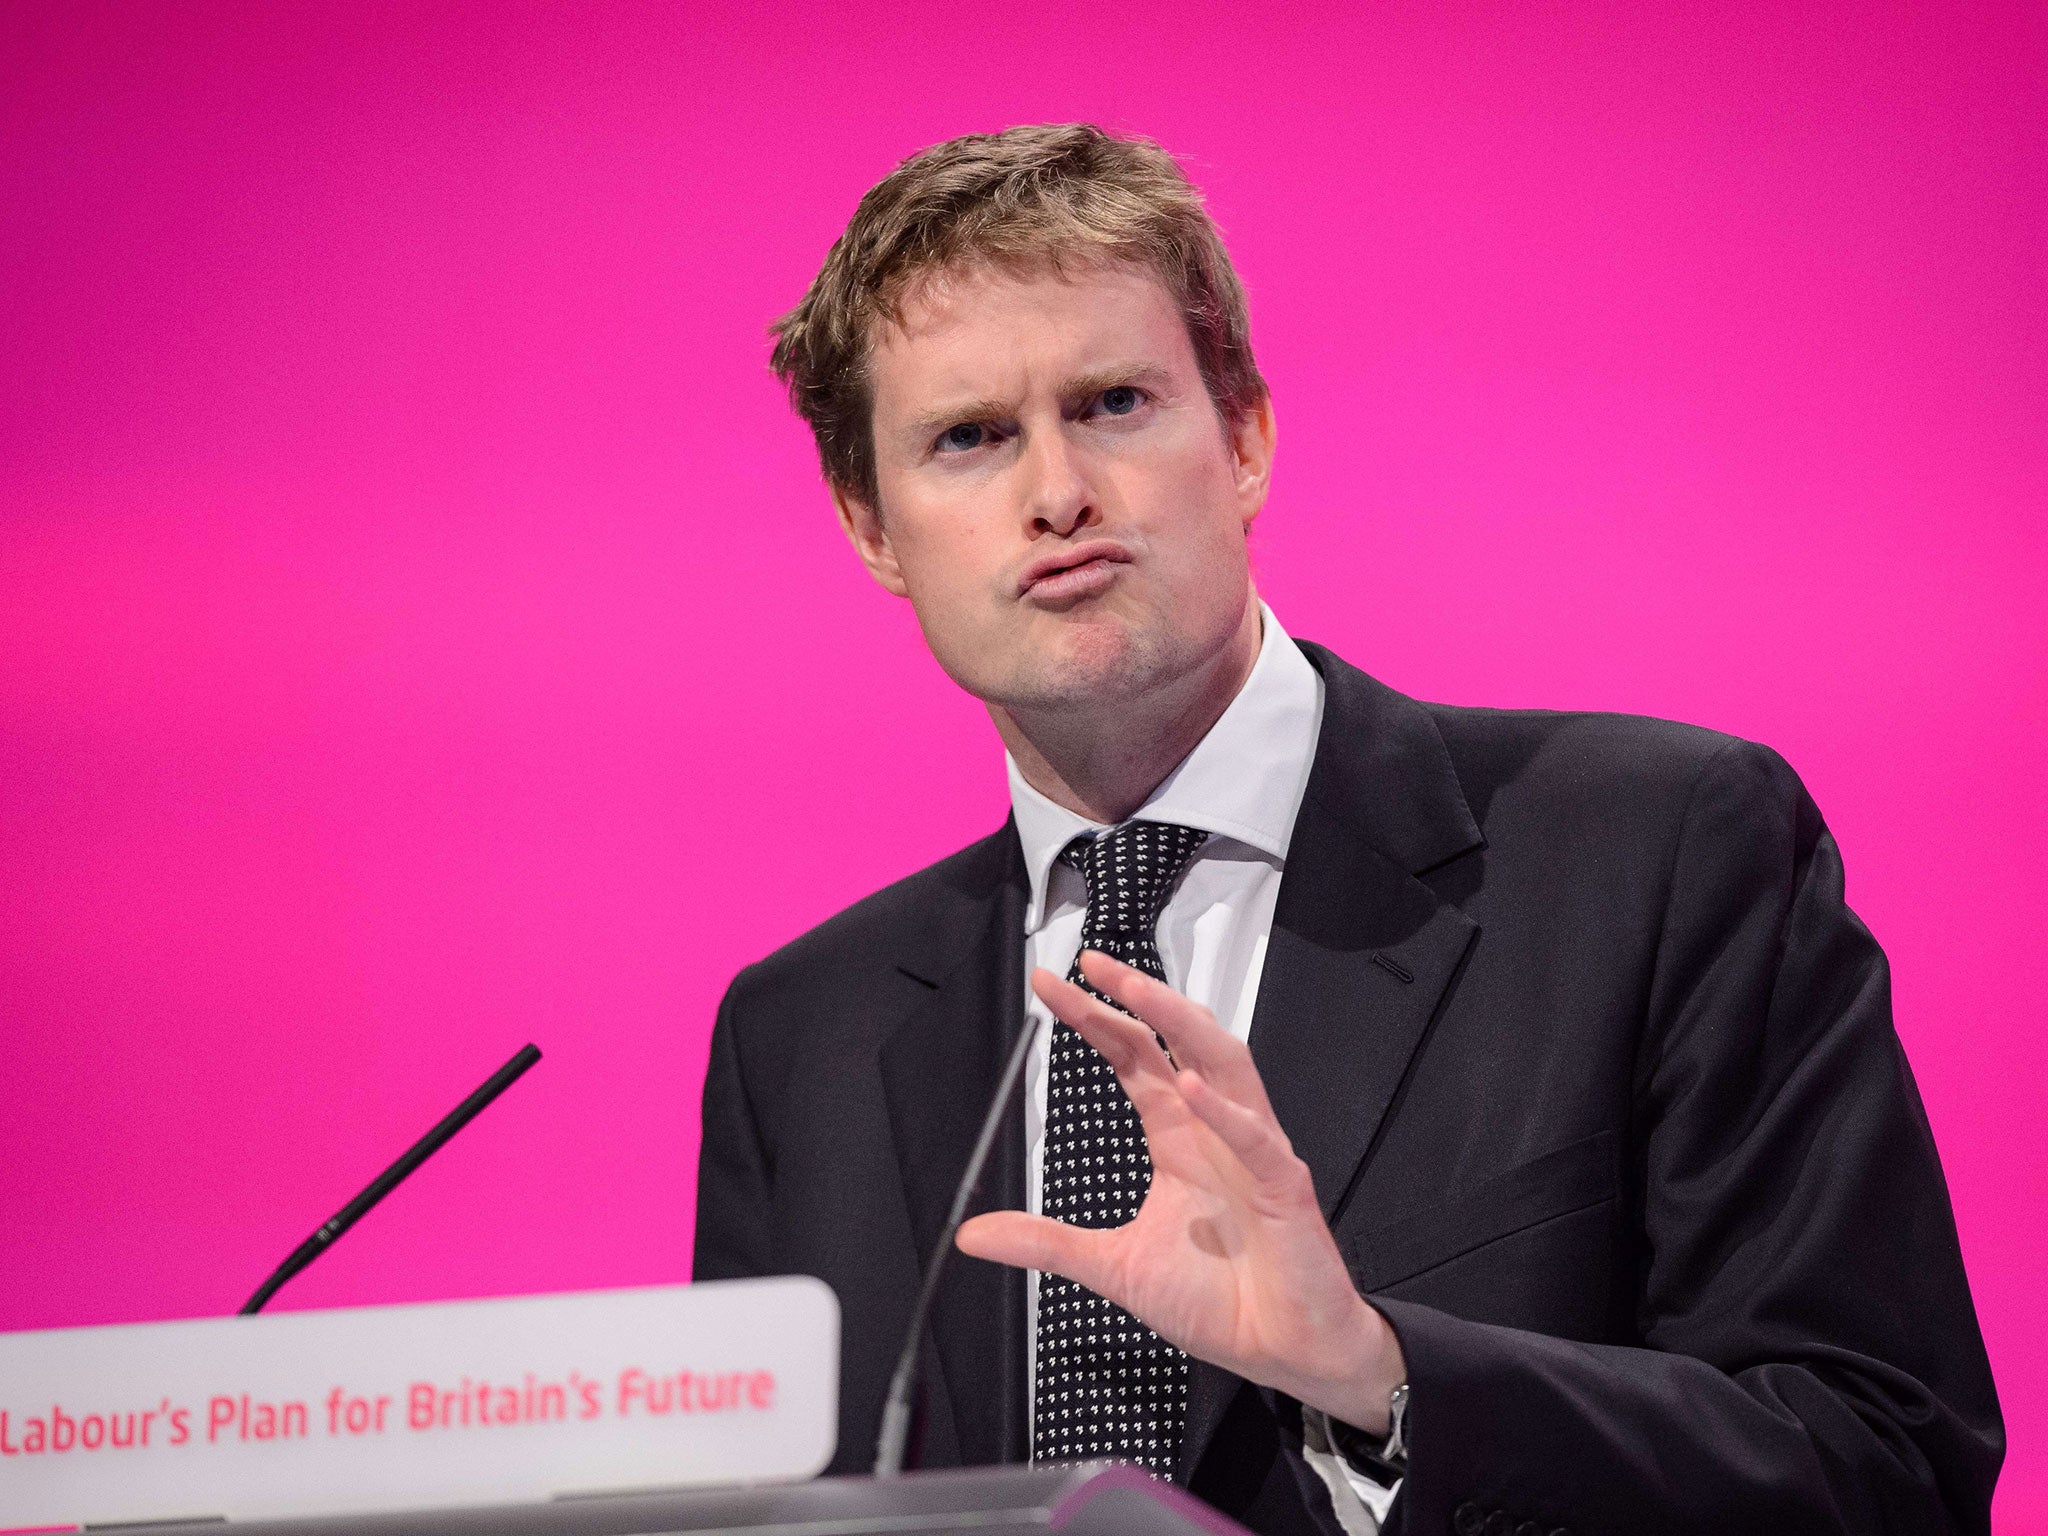 Shadow education secretary Tristram Hunt has suggested teachers take a public oath to commit themselves to the profession's values